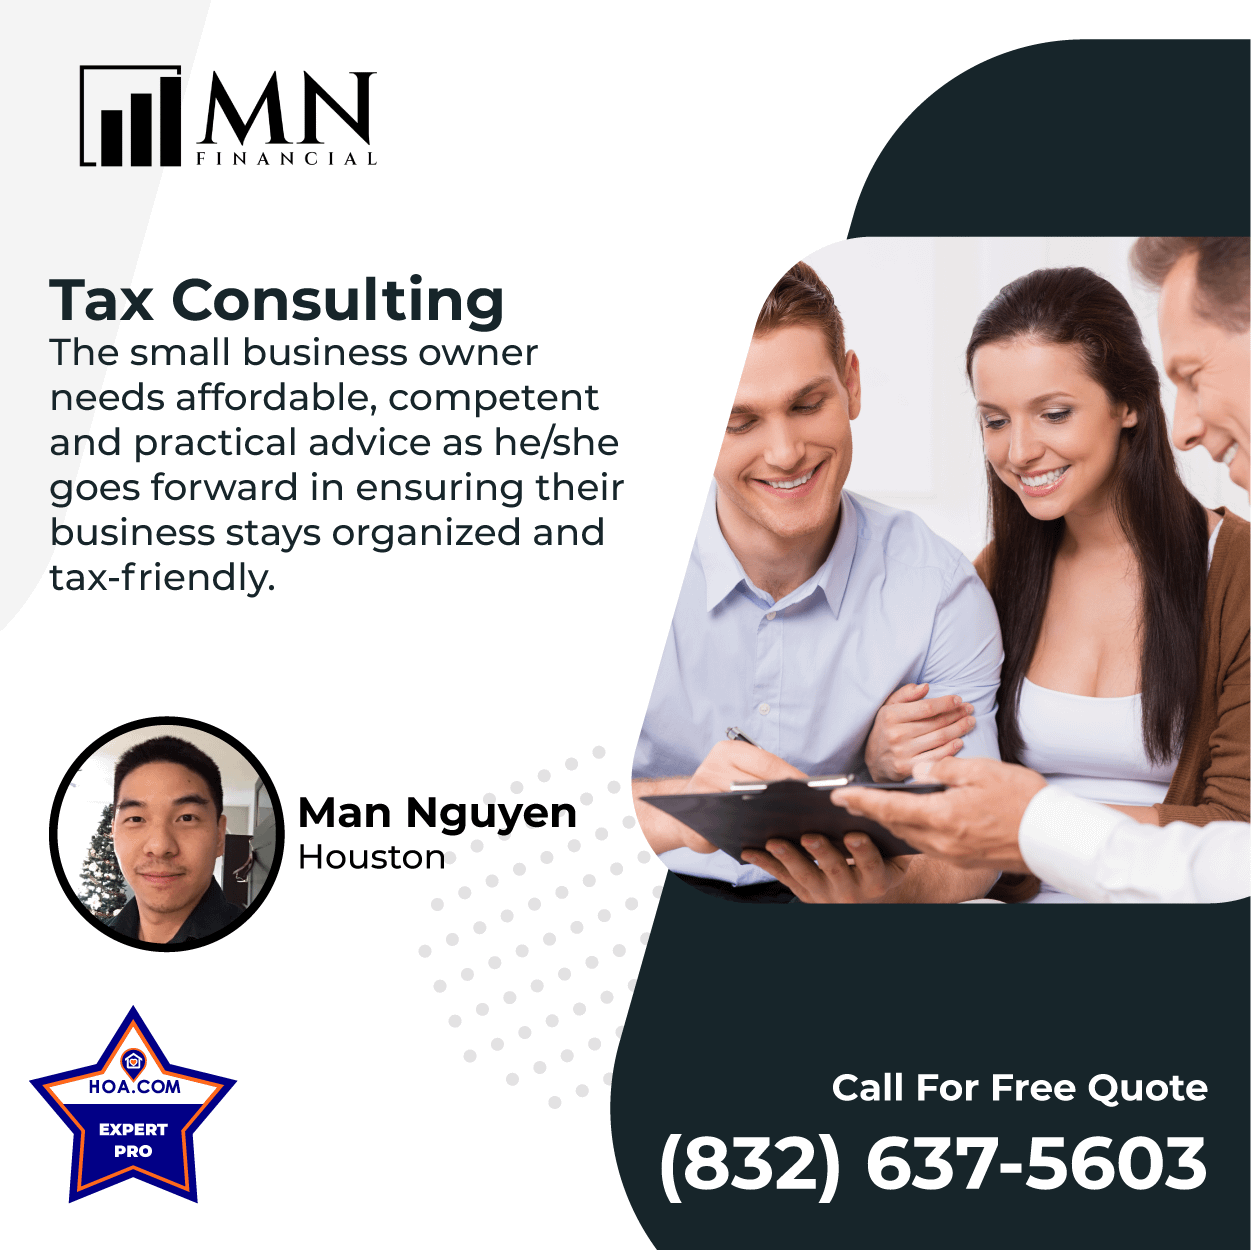 Tax Consulting MN Financial